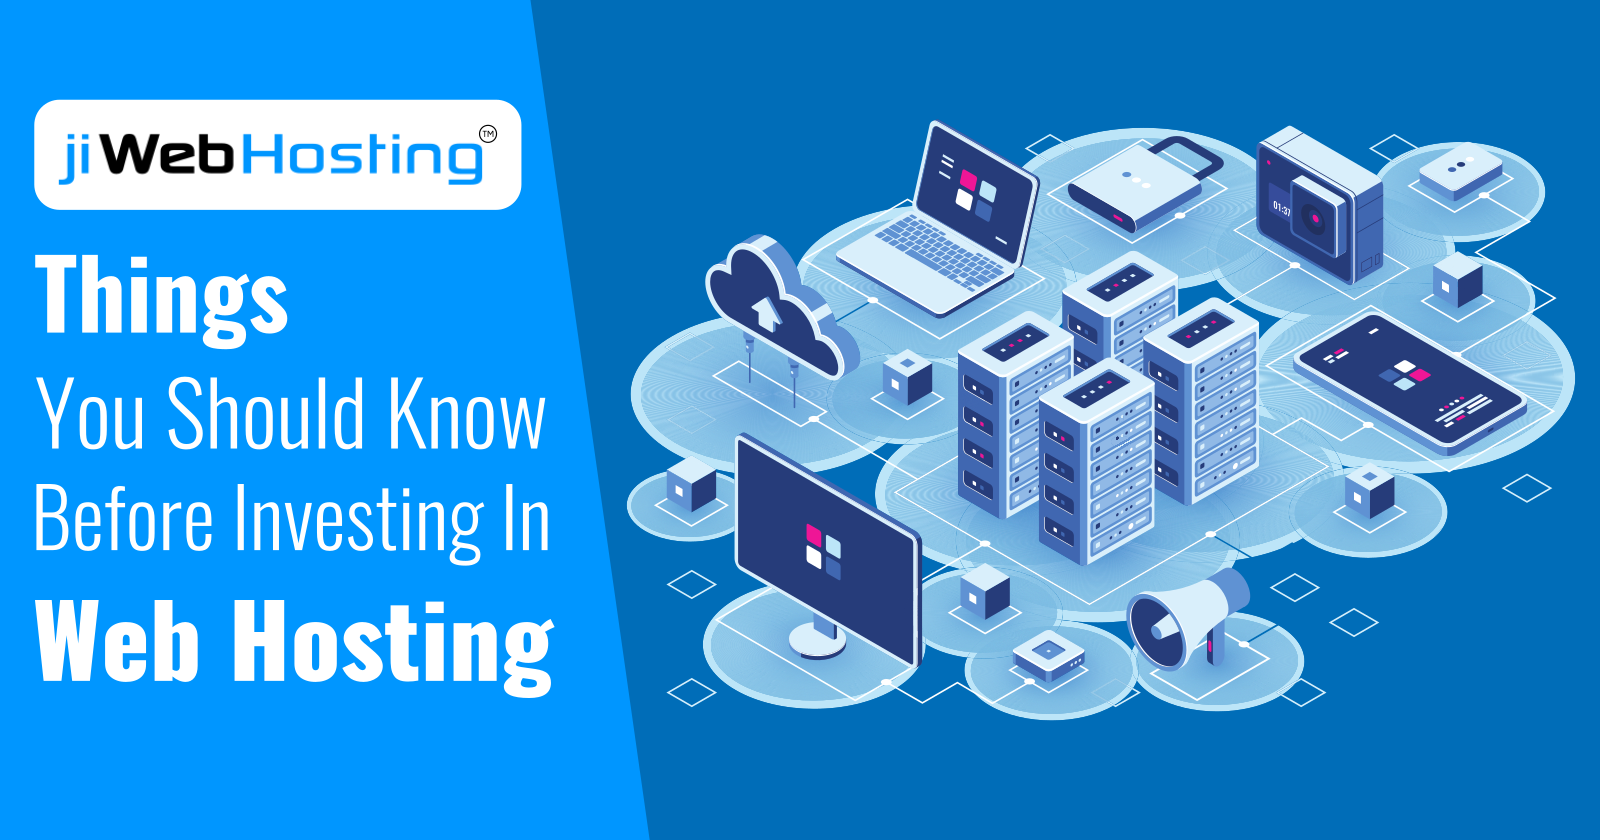 Things You Should Know Before Investing in Web Hosting